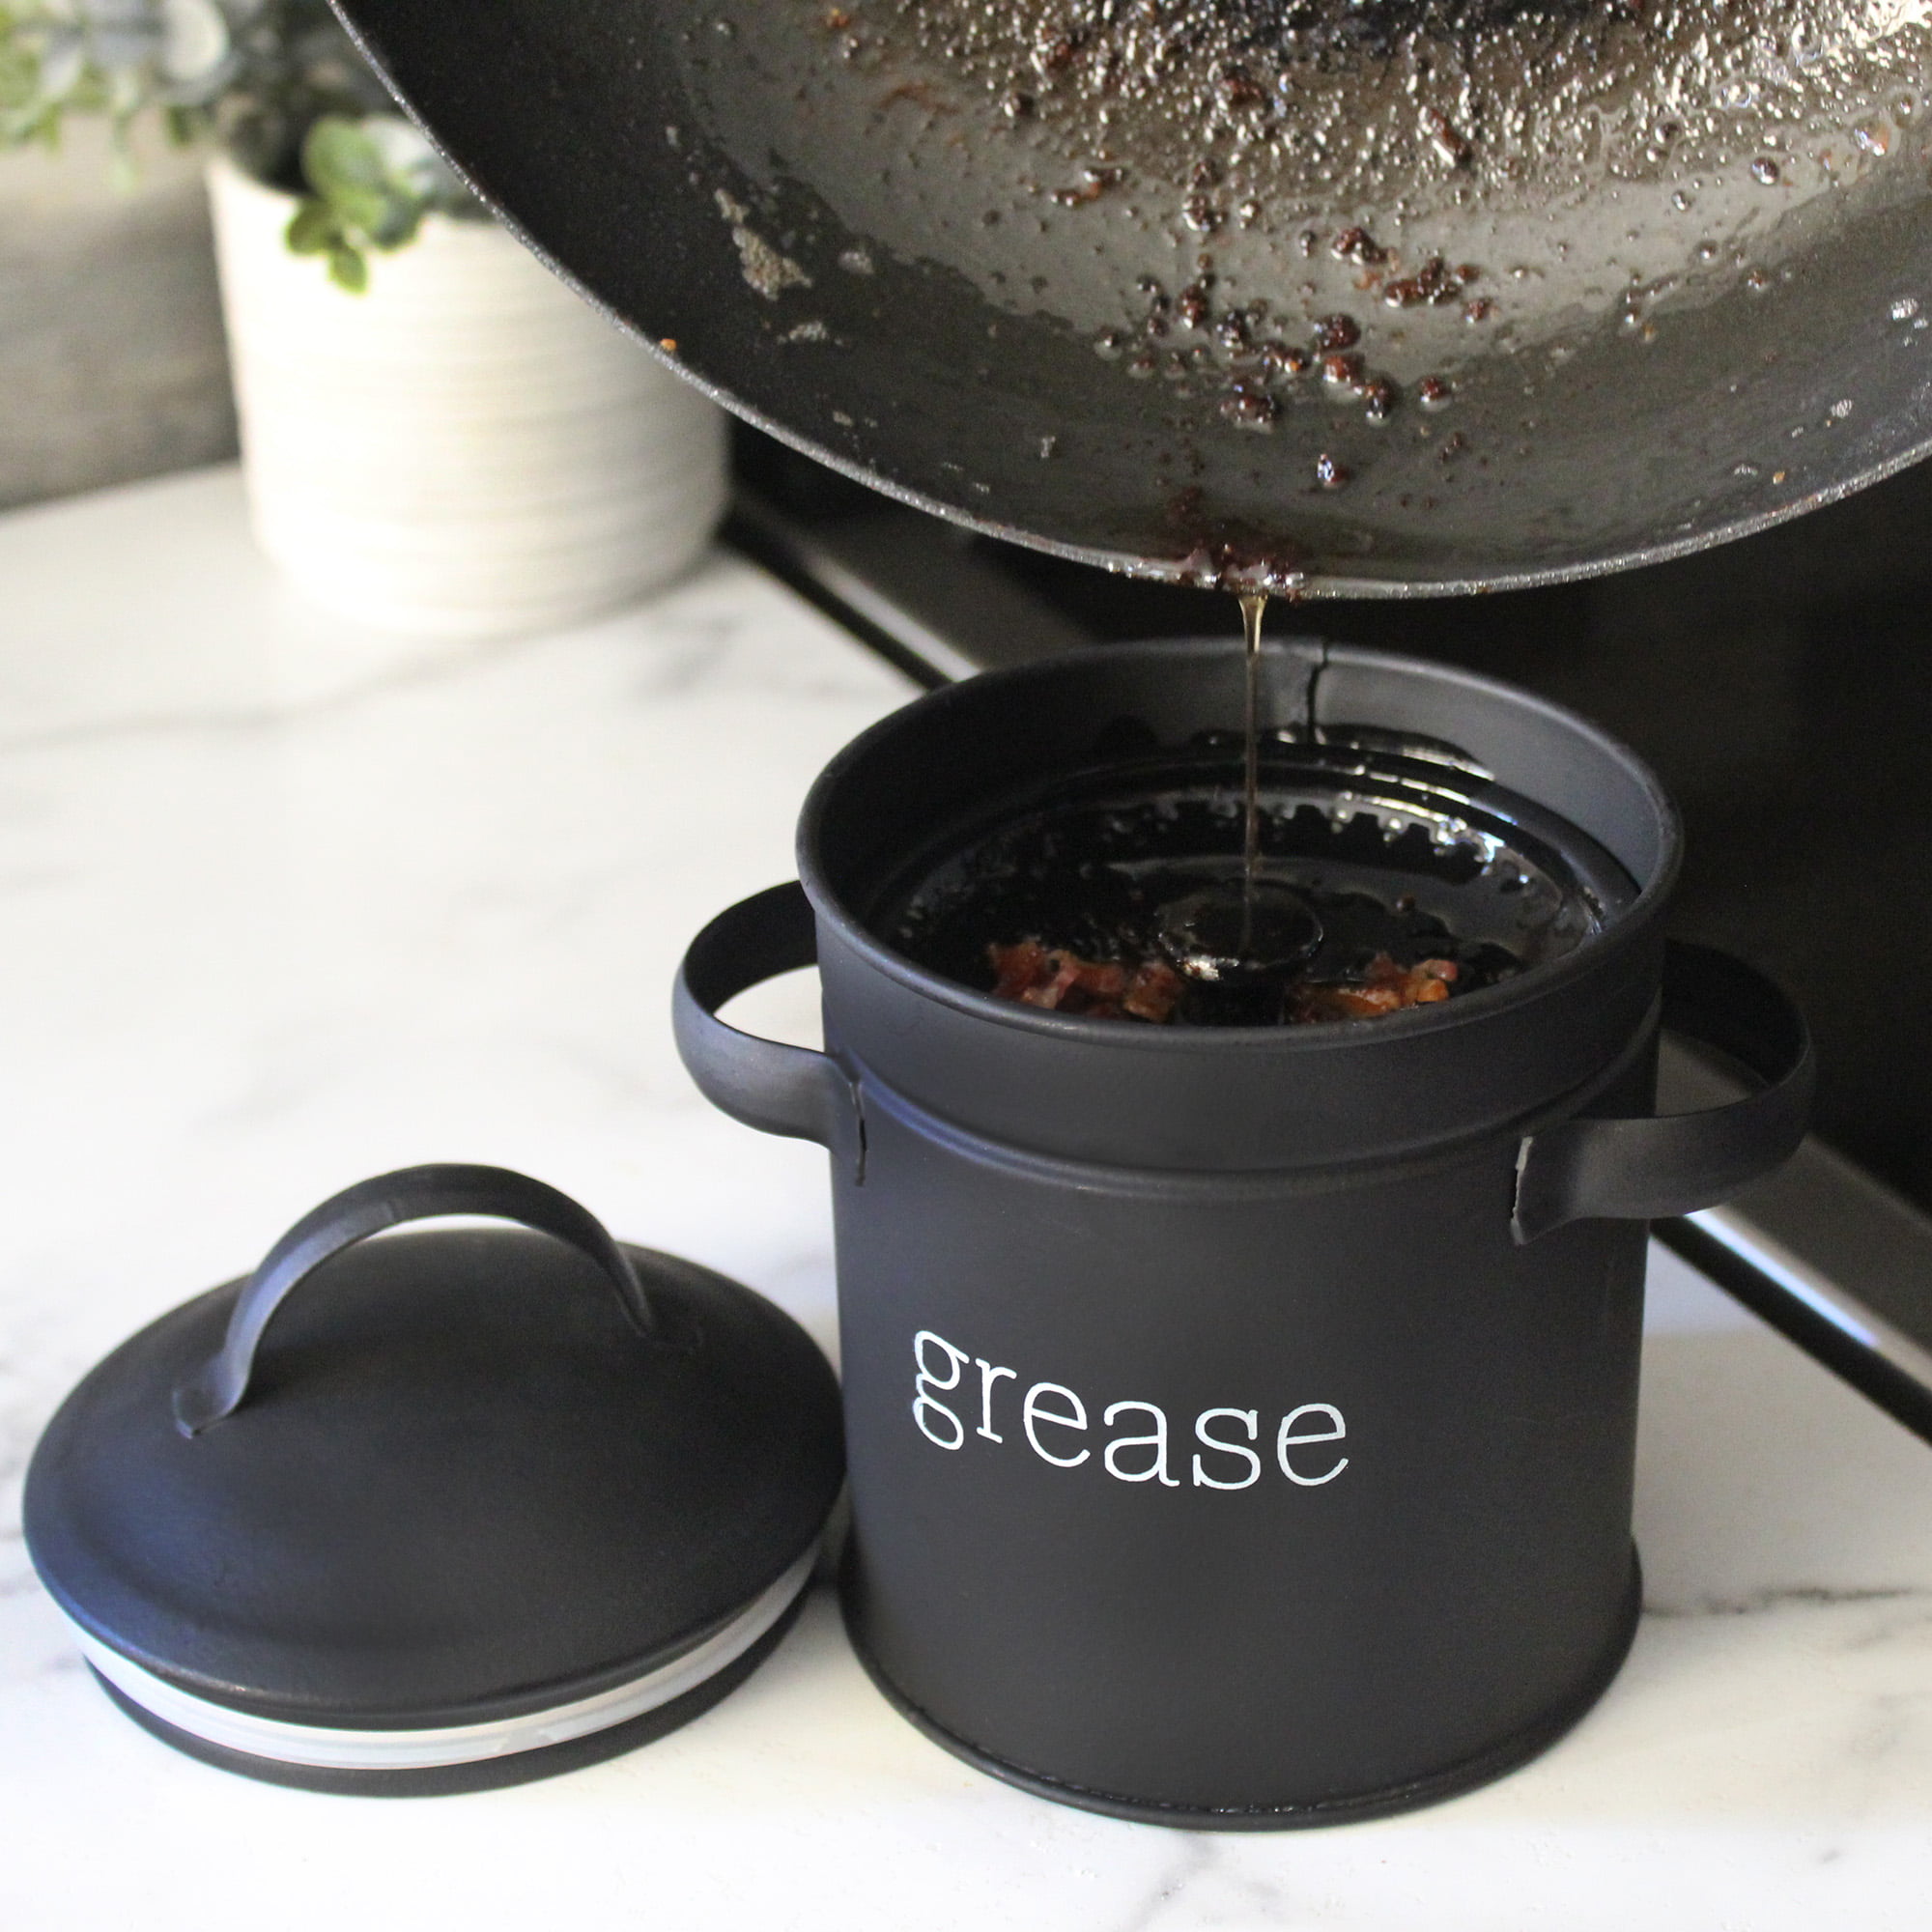 Bacon Grease Container with strainer - rustic mid-century modern Black